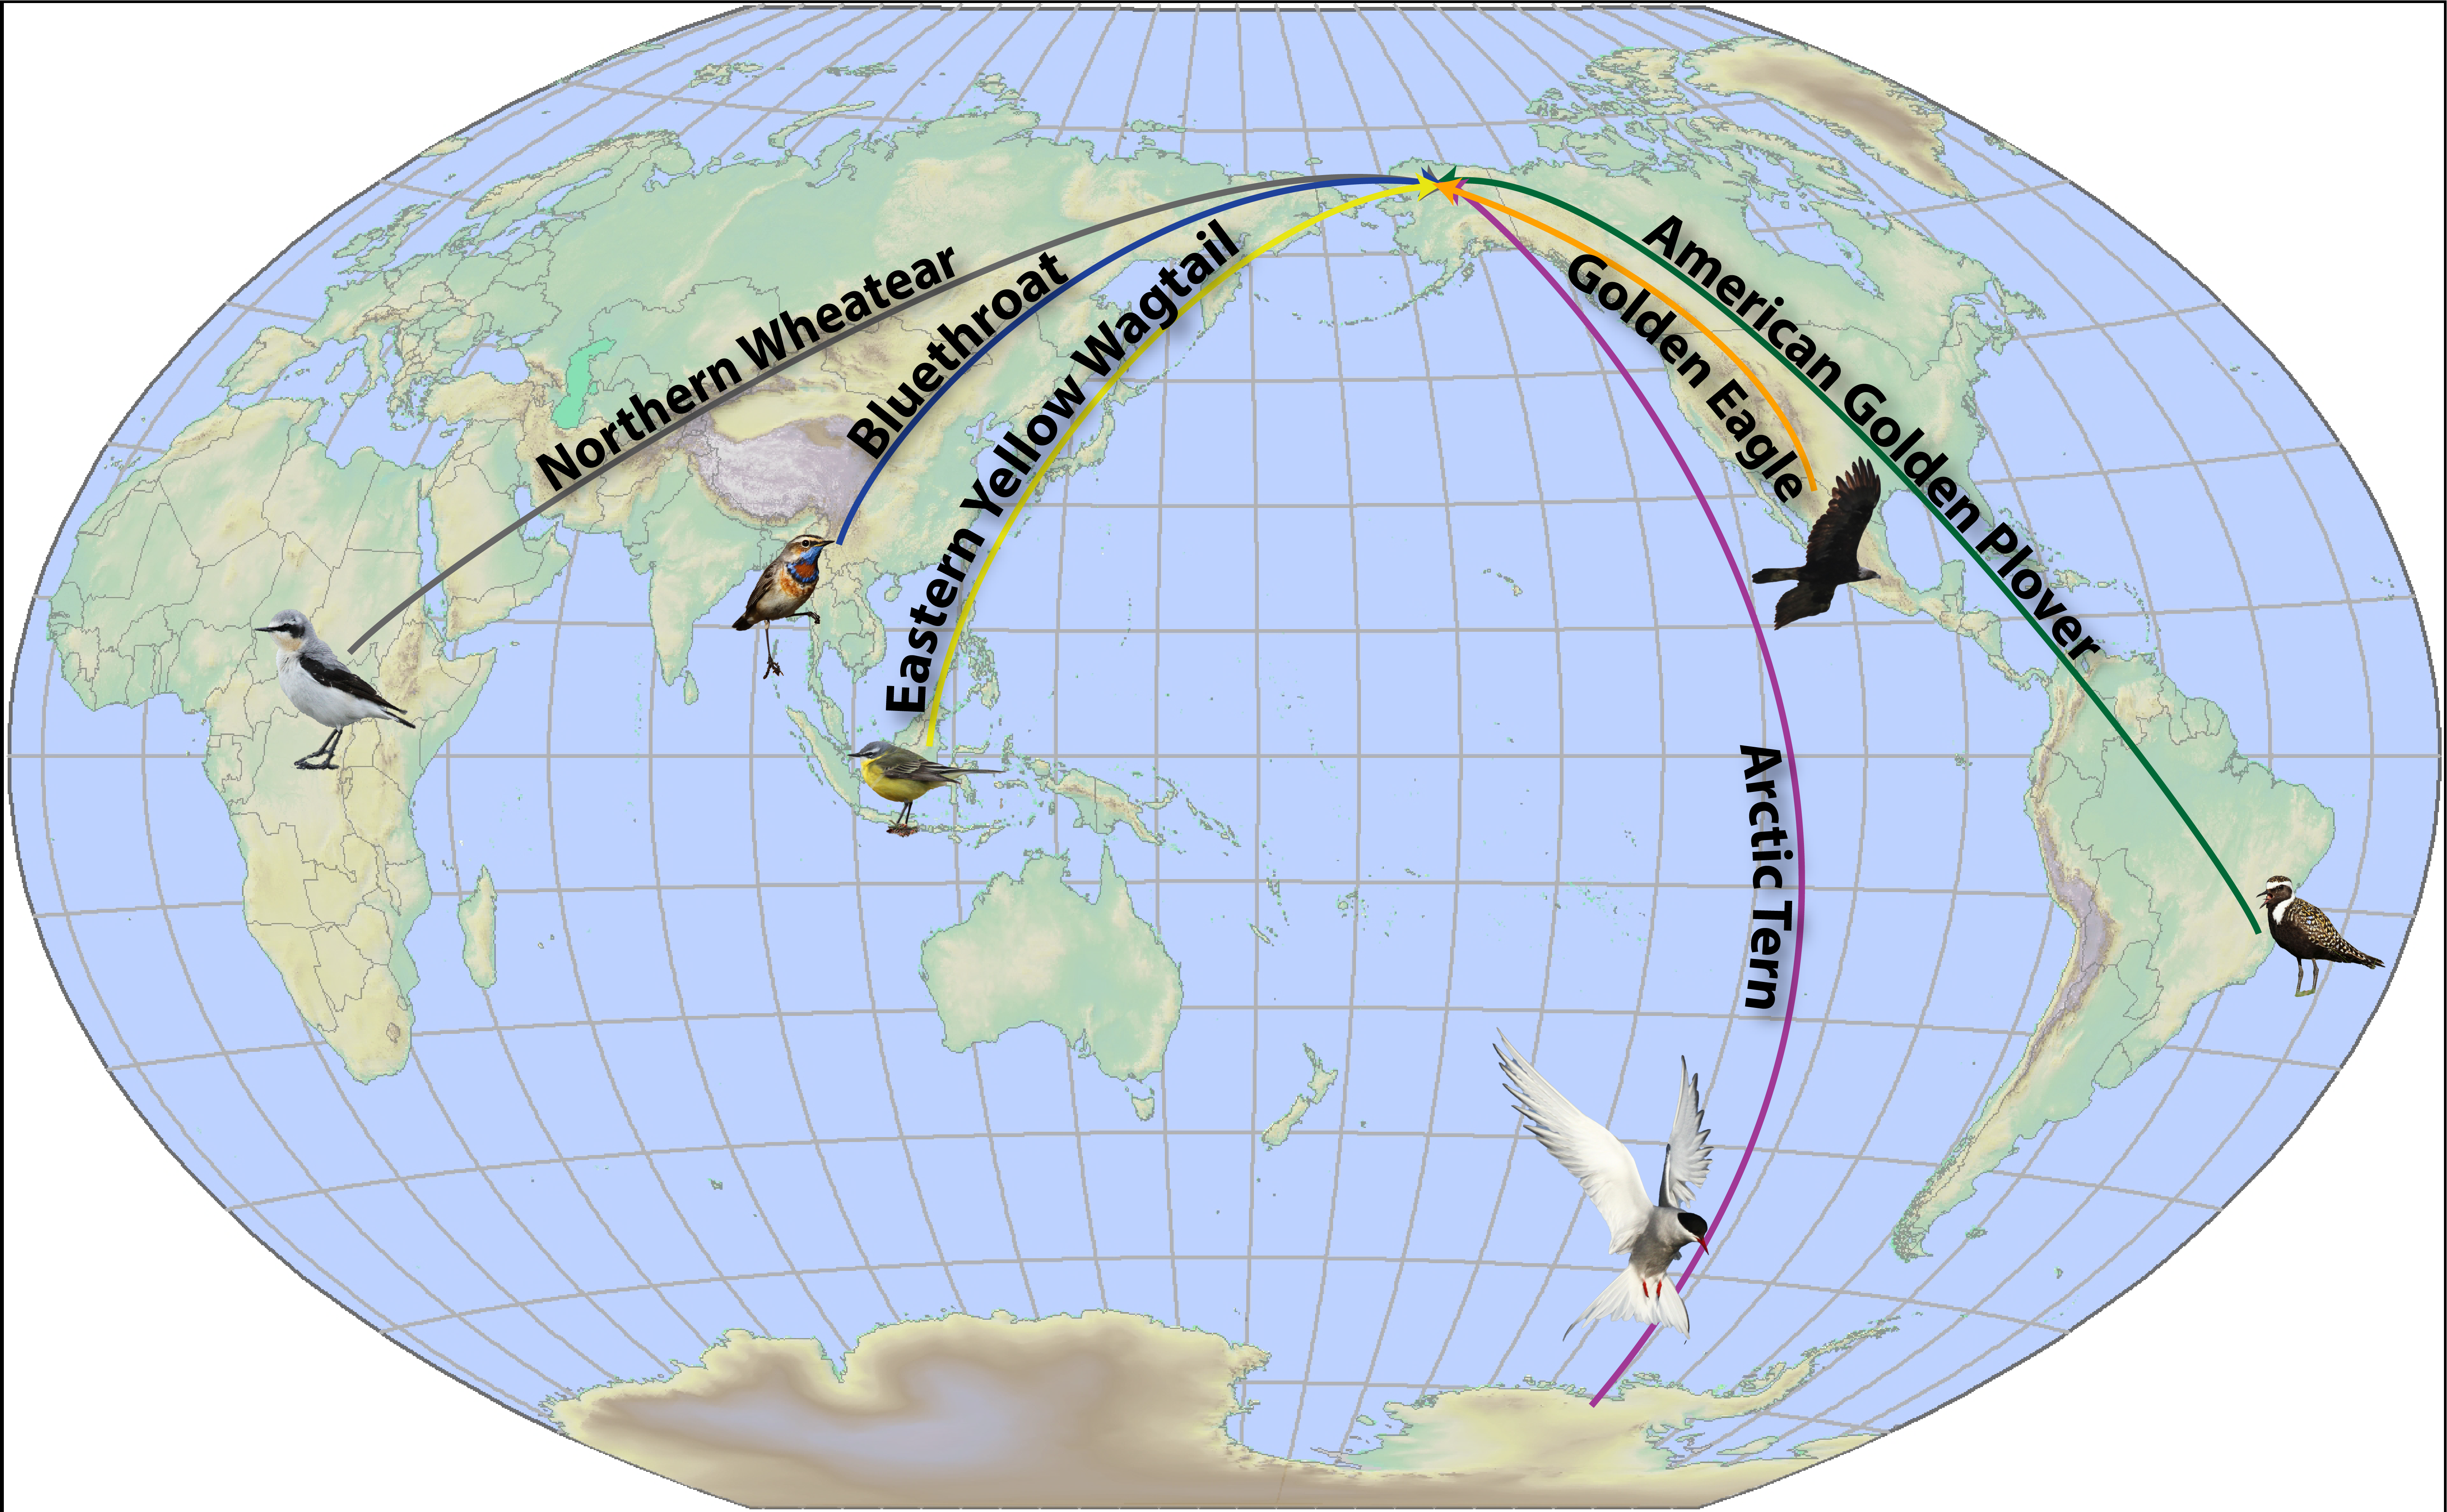 A map of the world showing spring migration routes to Gates of the Arctic  for Northern Wheatear from Sub-Saharan Africa, Bluethroat from Central Asia, Eastern Yellow Wagtail from South Asia, Arctic Tern from Antarctica, Golden Eagle from Mexico